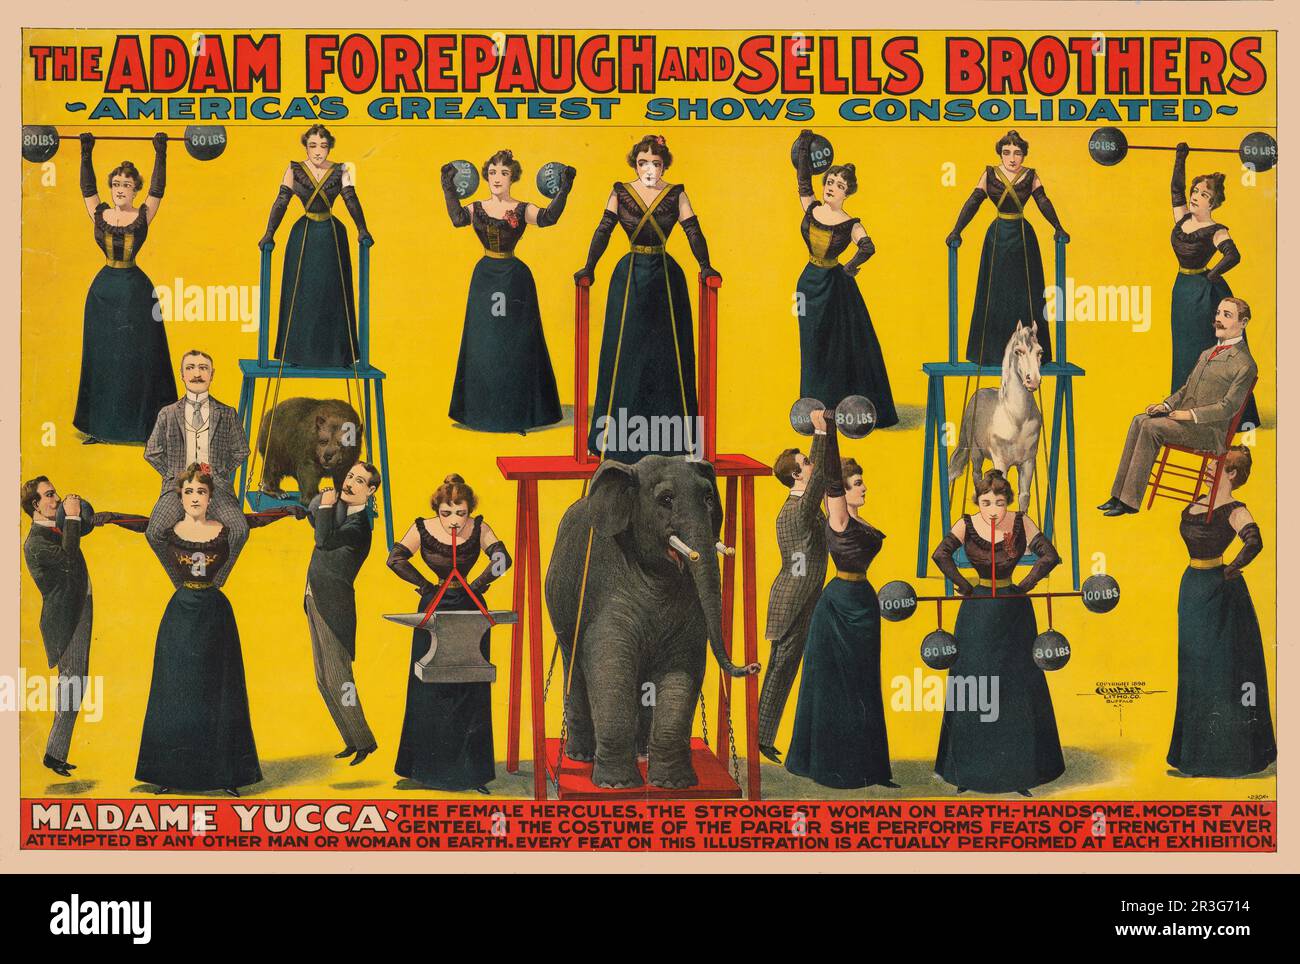 Vintage Adam Forepaugh and Sells Brothers circus poster of Madame Yucca lifting weights, people, and animals, circa 1898. Stock Photo